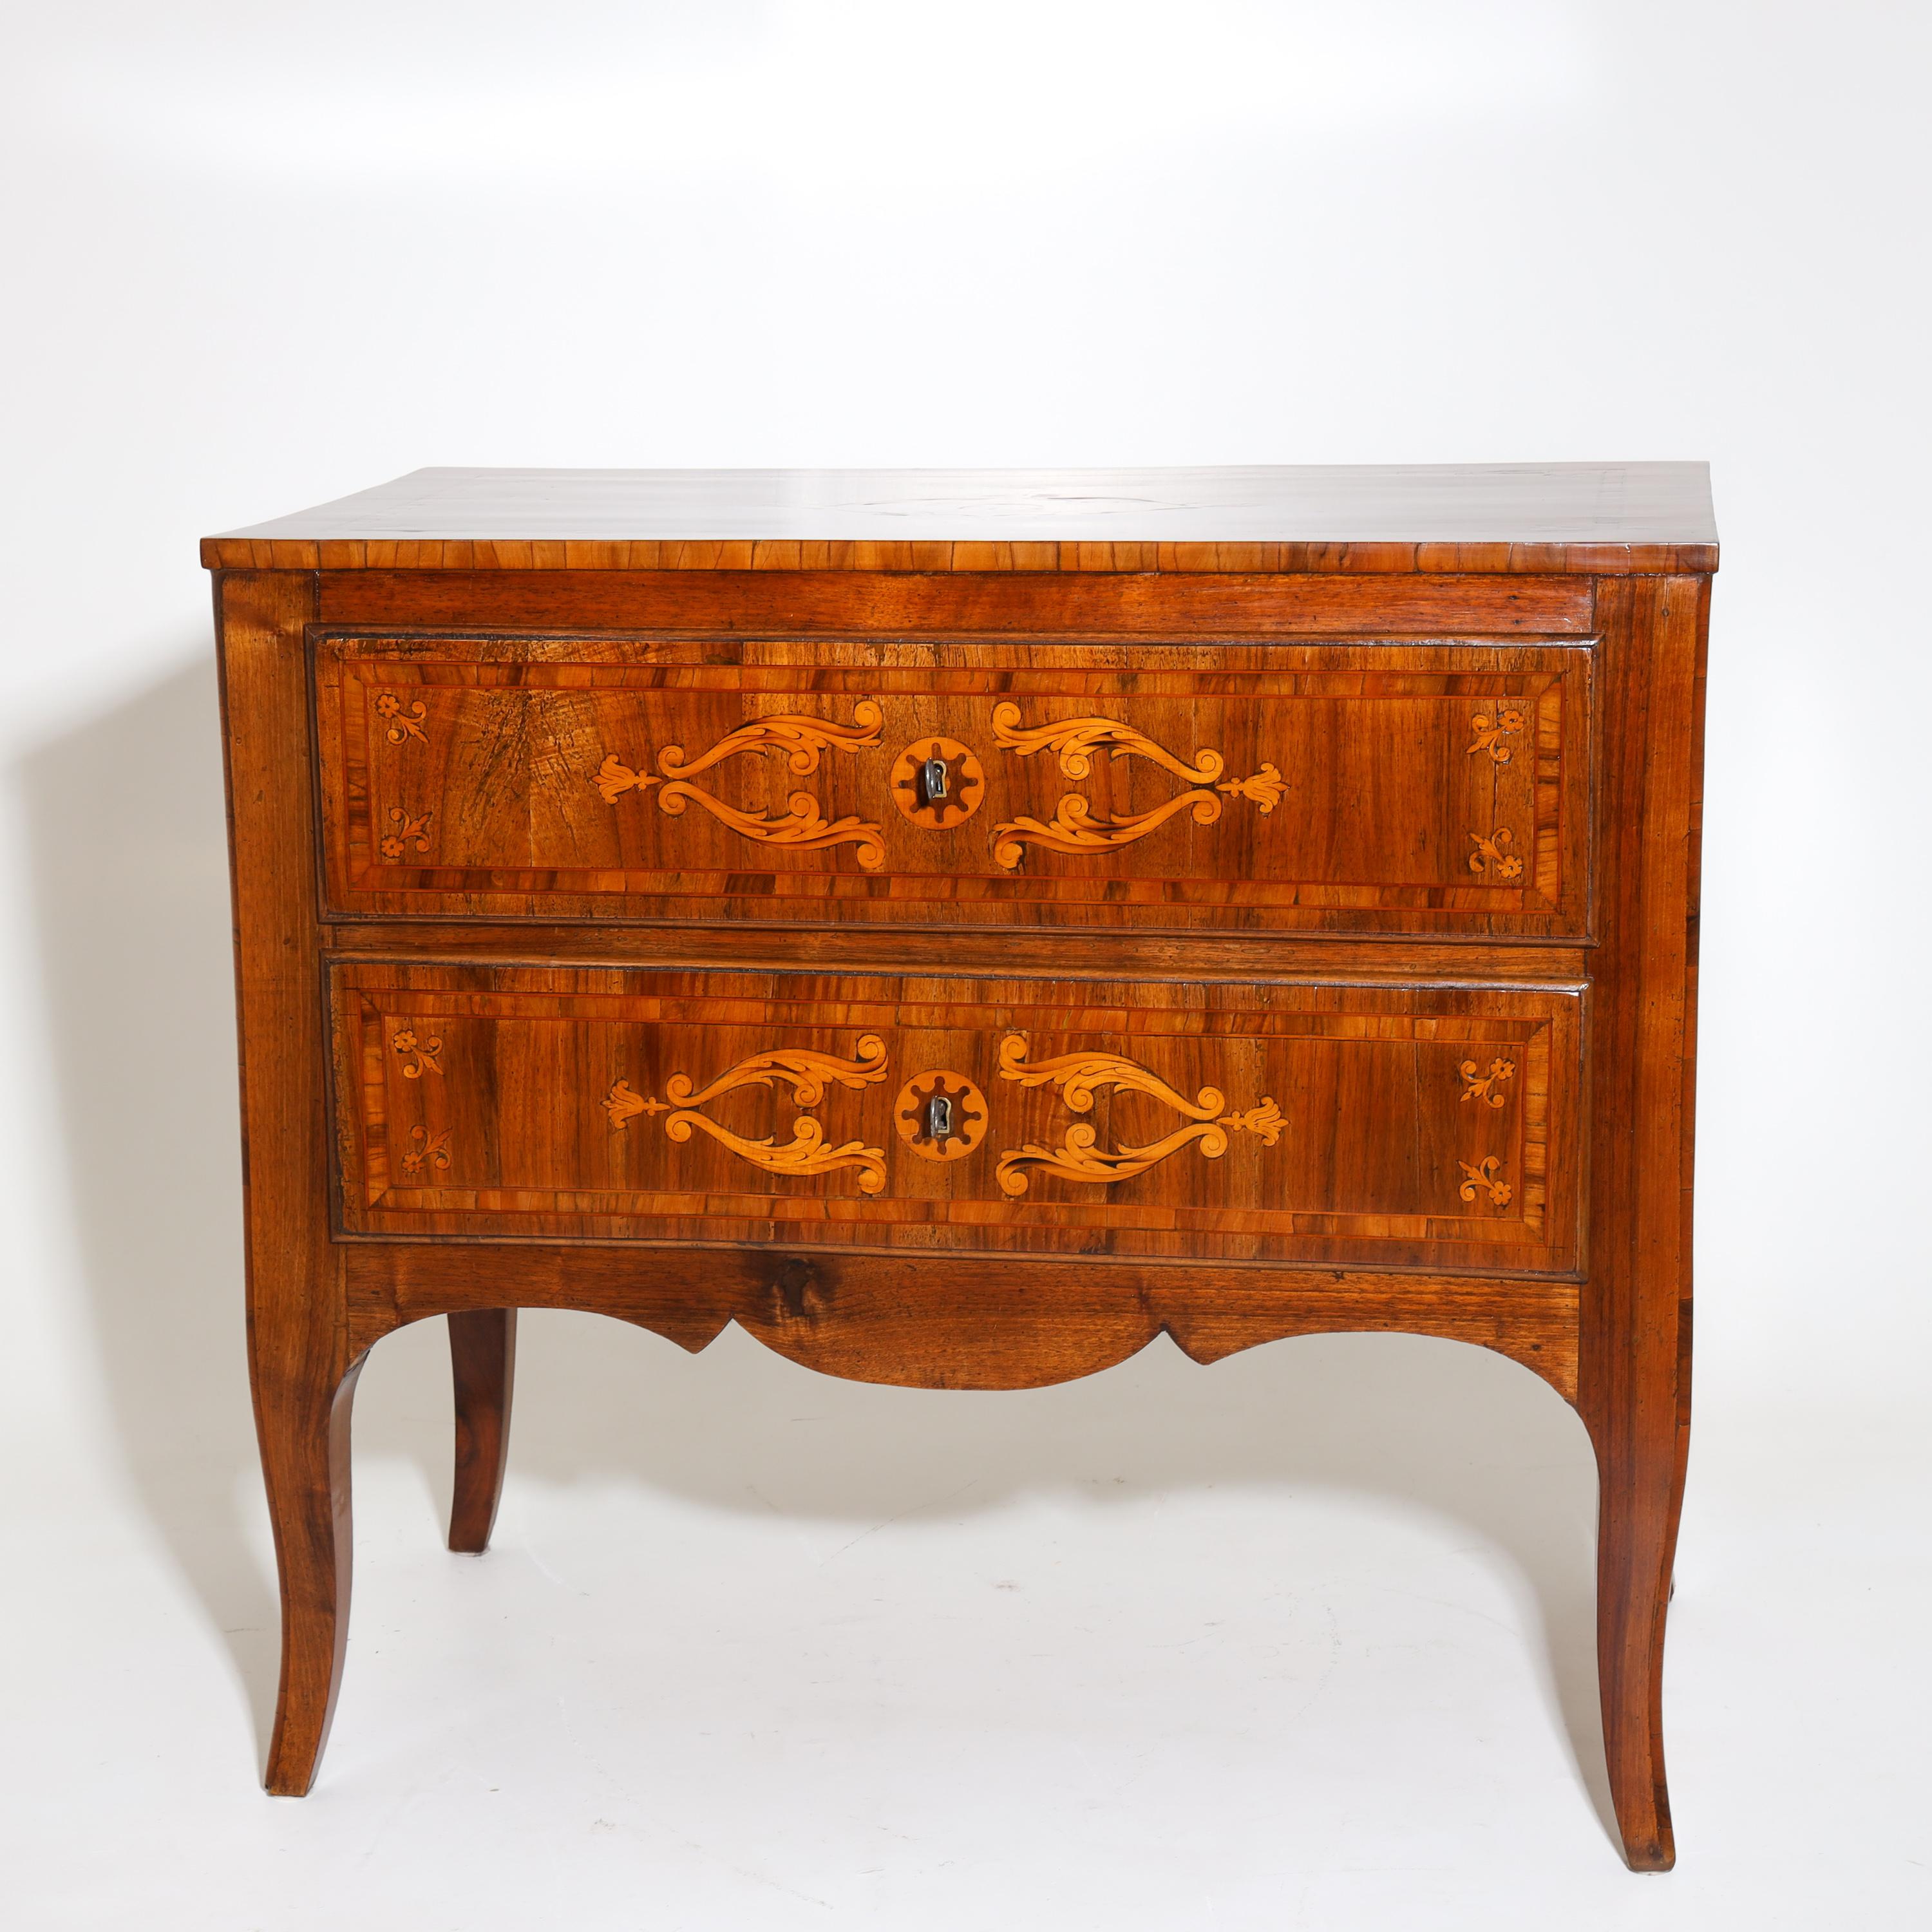 Chest of drawers standing on curved legs with two drawers and a curved apron. The chest of drawers is decorated on all sides with tendril-shaped inlays. Walnut, solid and veneered. The chest of drawers has been expertly refinished and hand-polished.